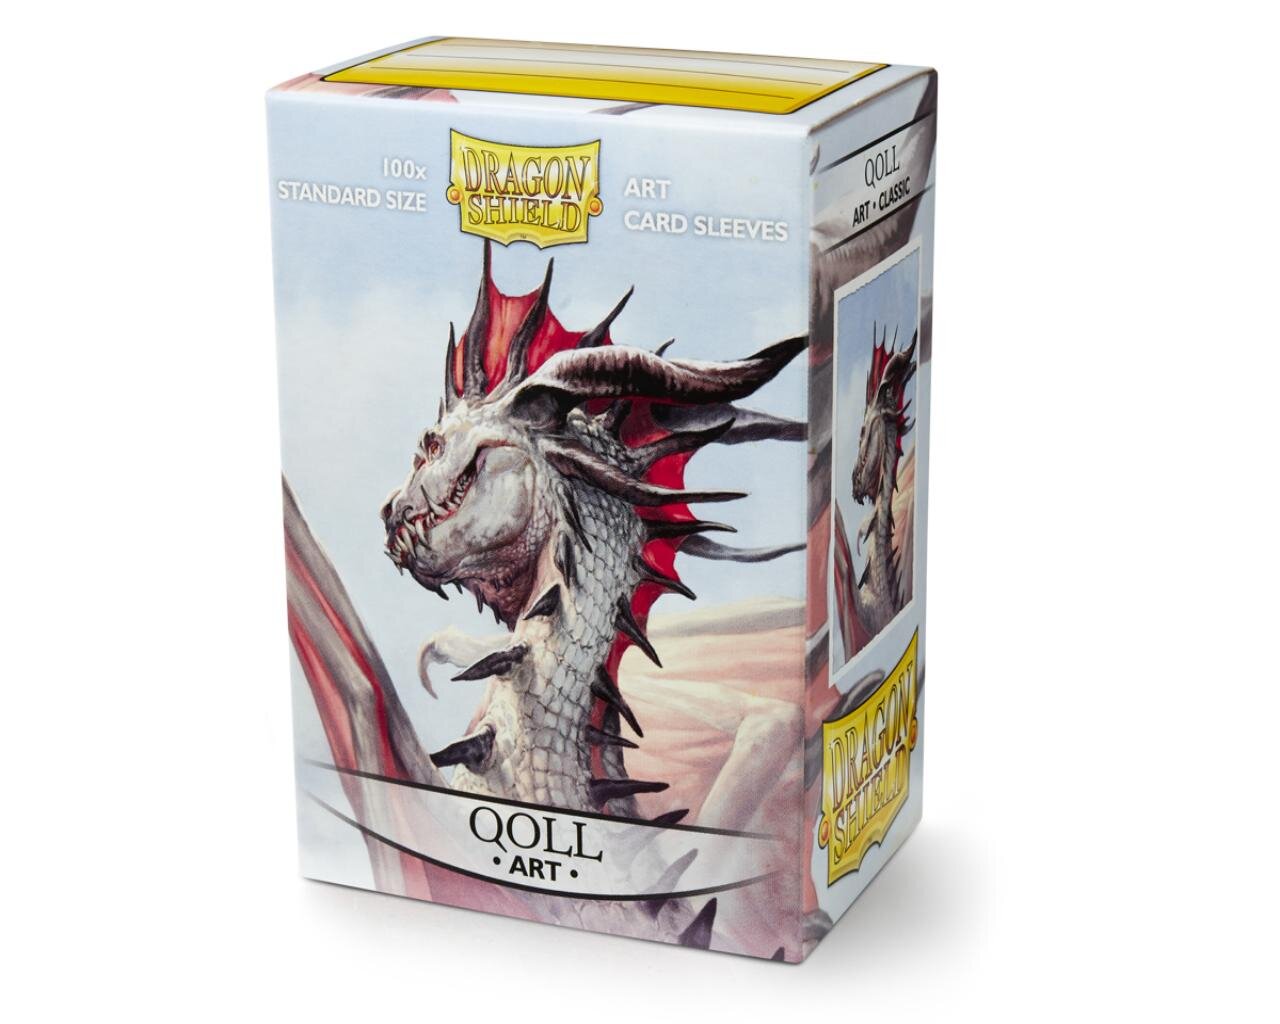 Dragon Shield Mear Art 100 Standard Size Card Sleeves NEW  IN STOCK 